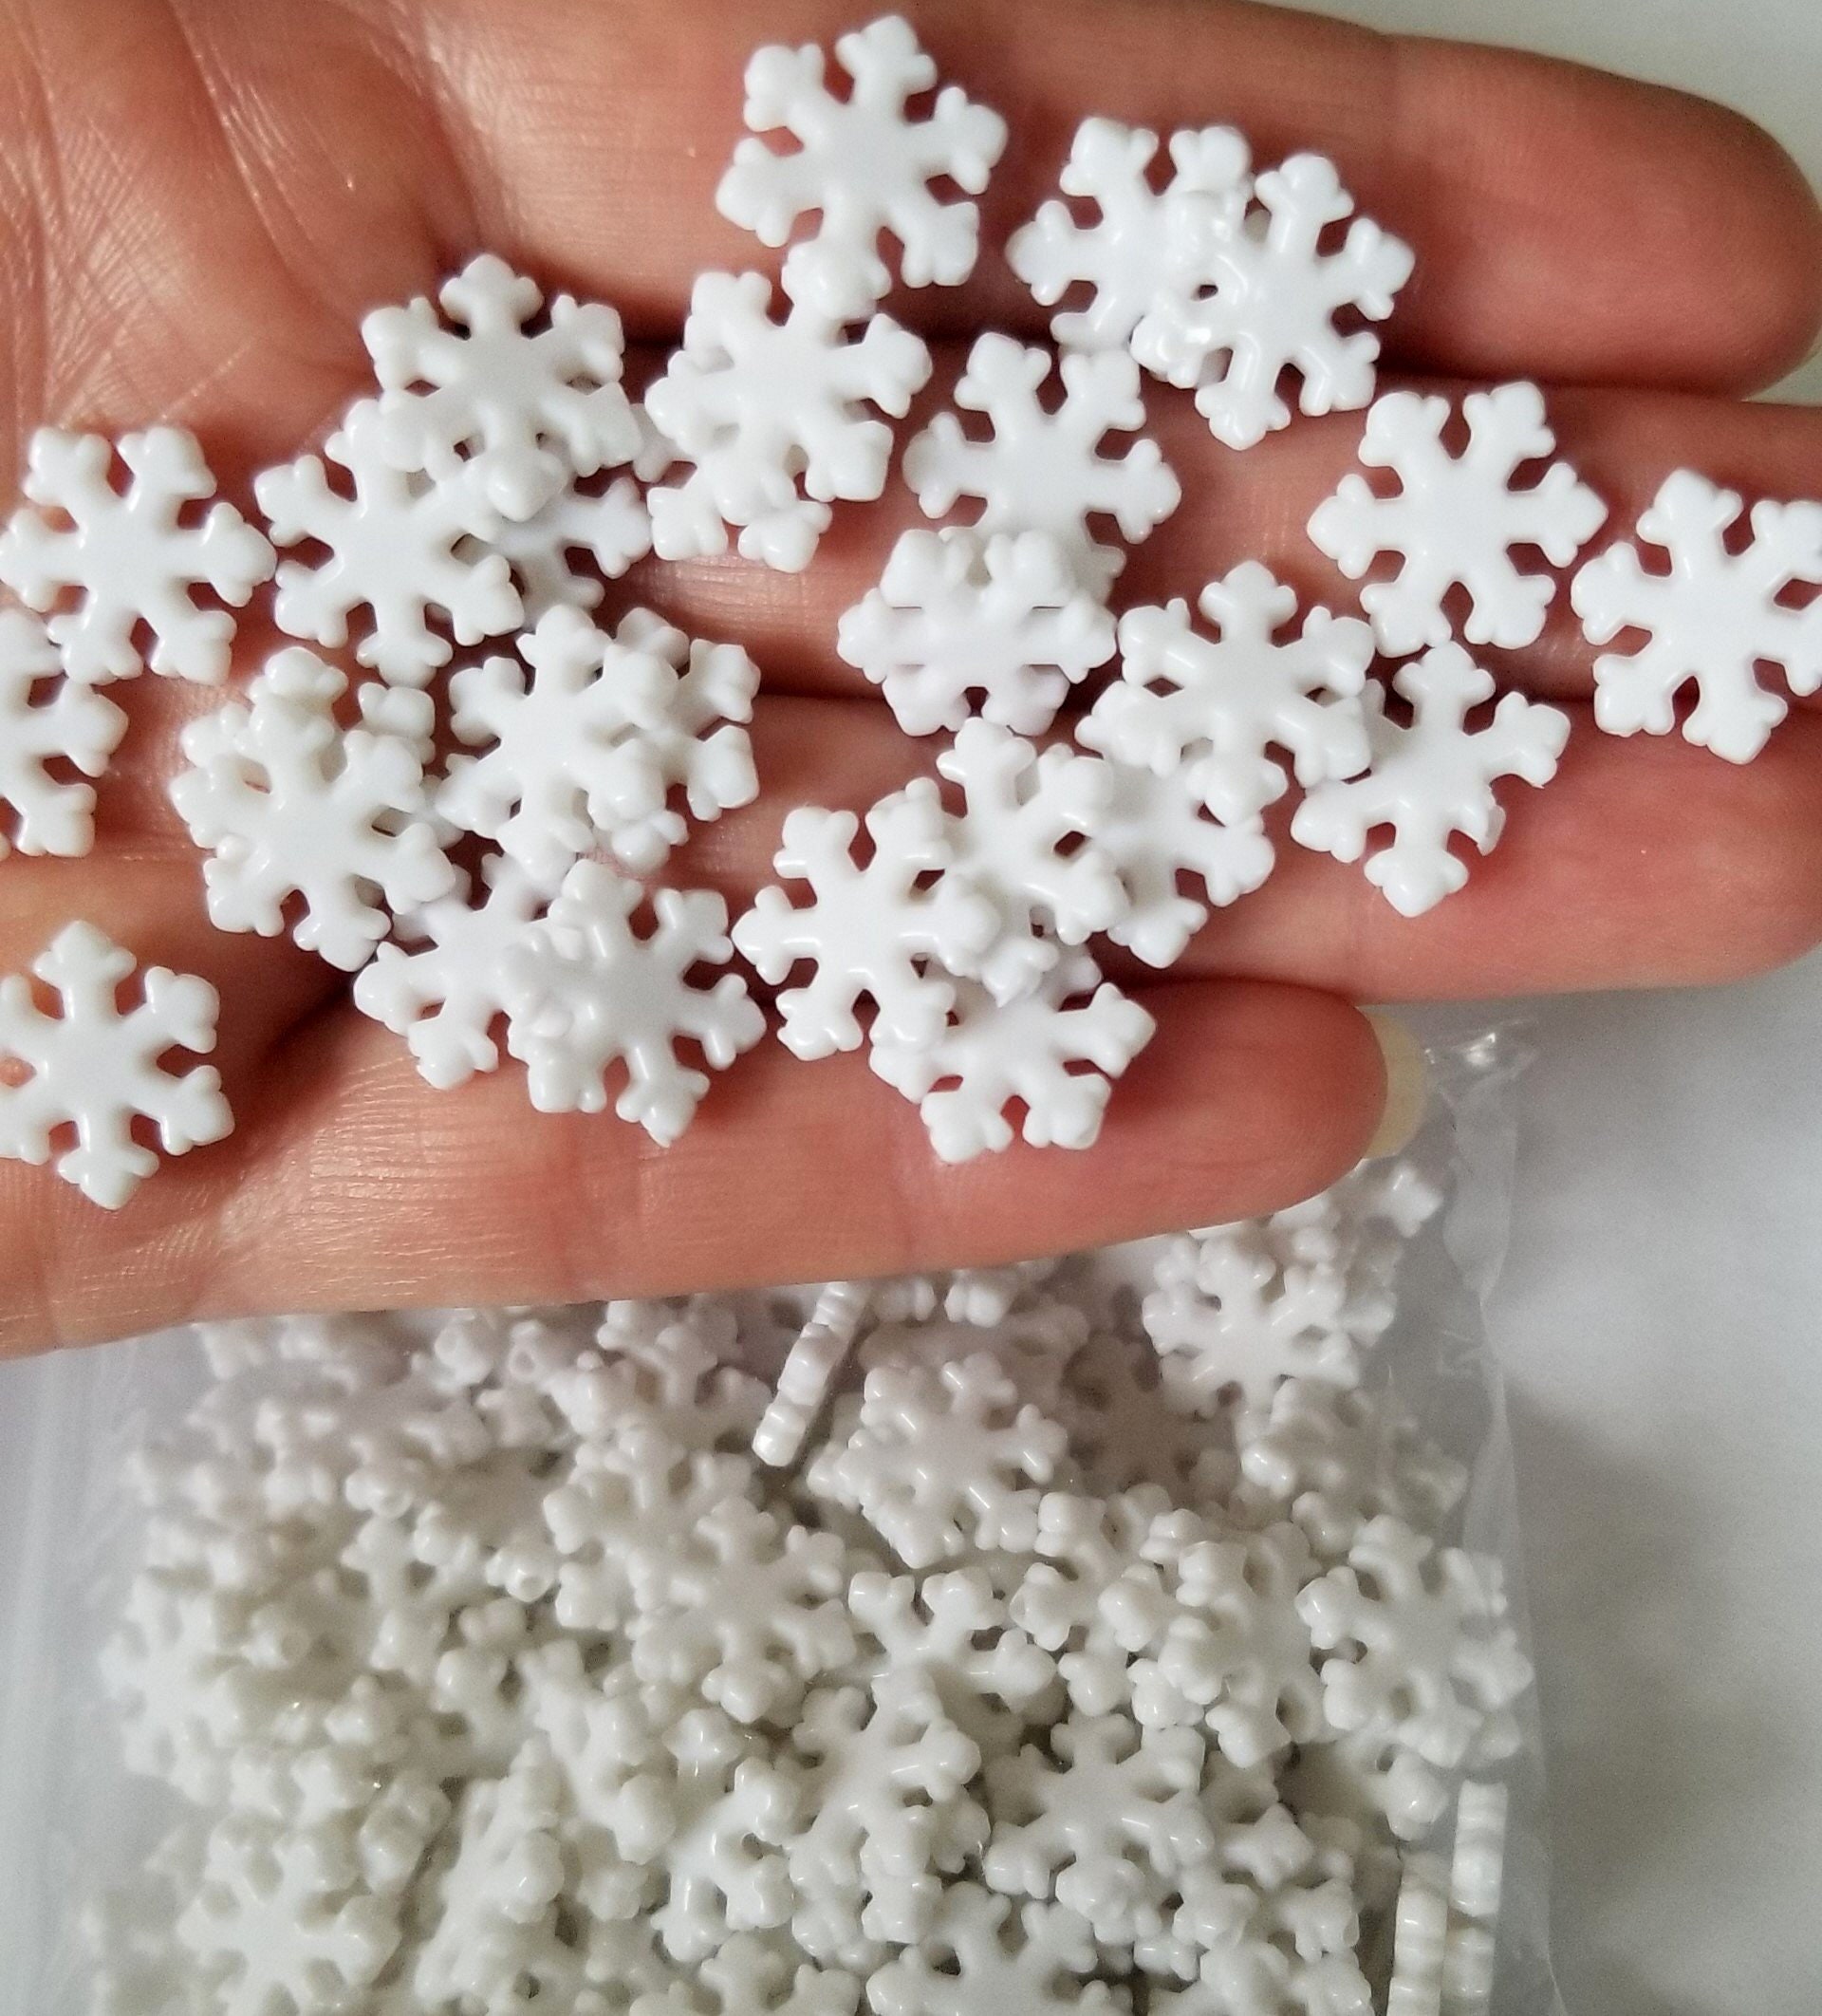 White Gems & Jewels for Crafts & Jewelry Making, Buttons Galore